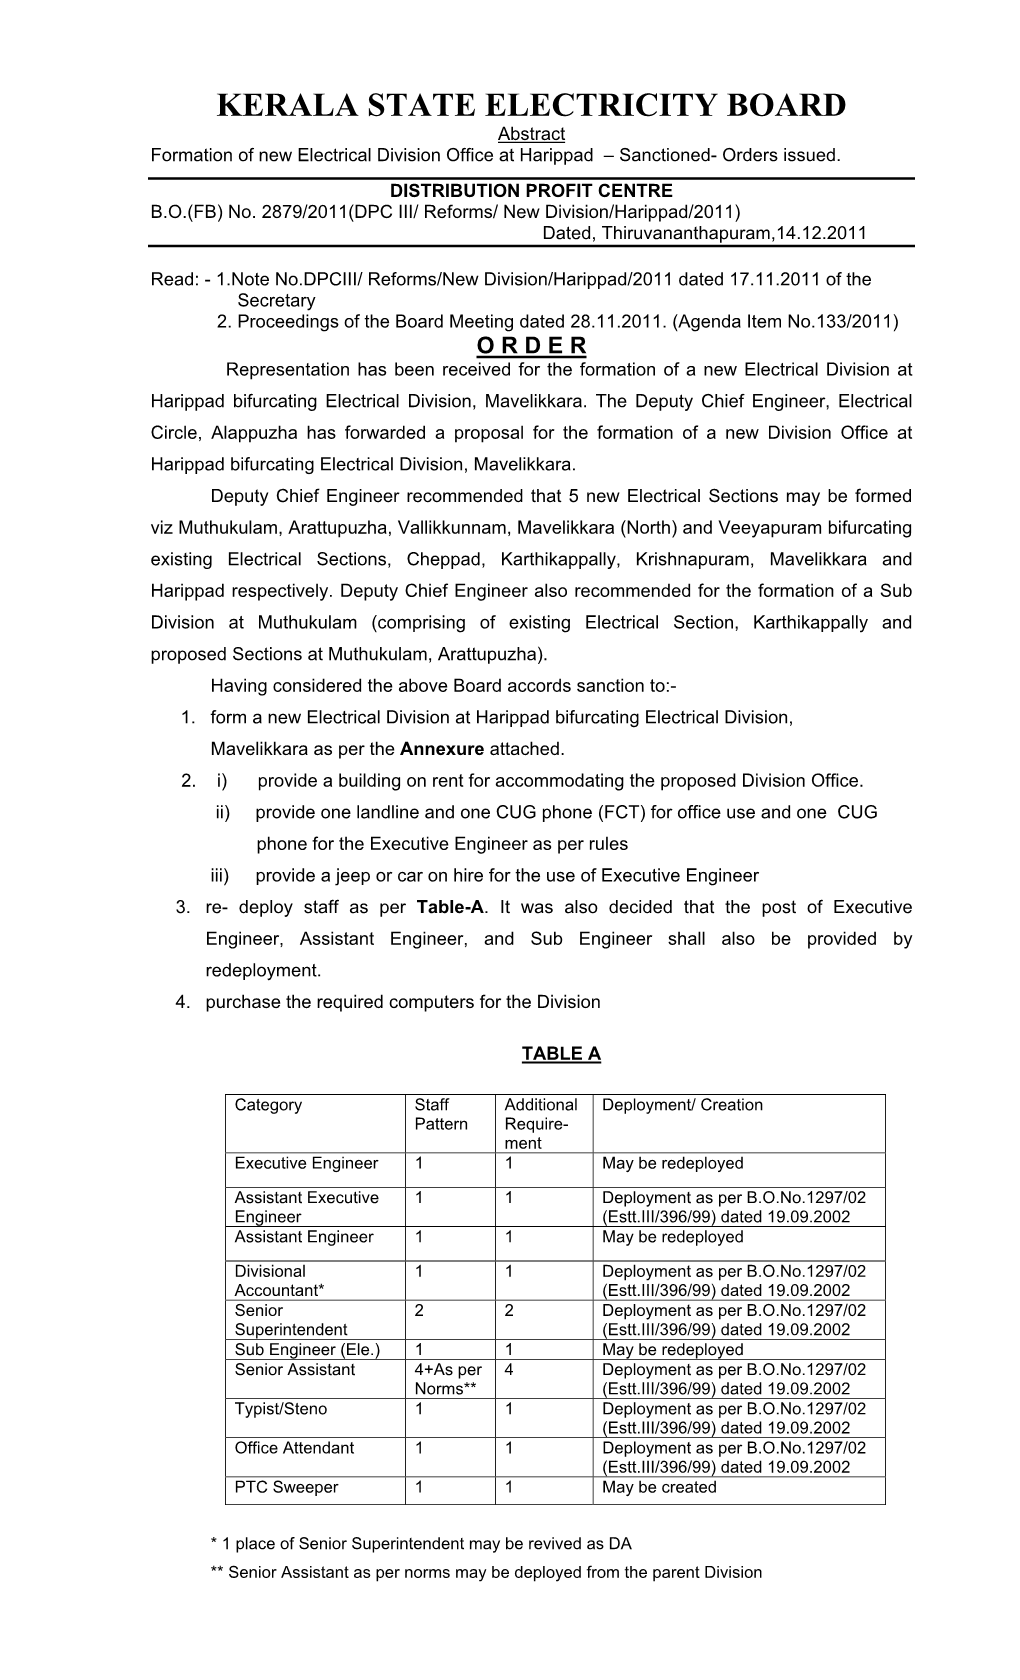 KERALA STATE ELECTRICITY BOARD Abstract Formation of New Electrical Division Office at Harippad – Sanctioned- Orders Issued